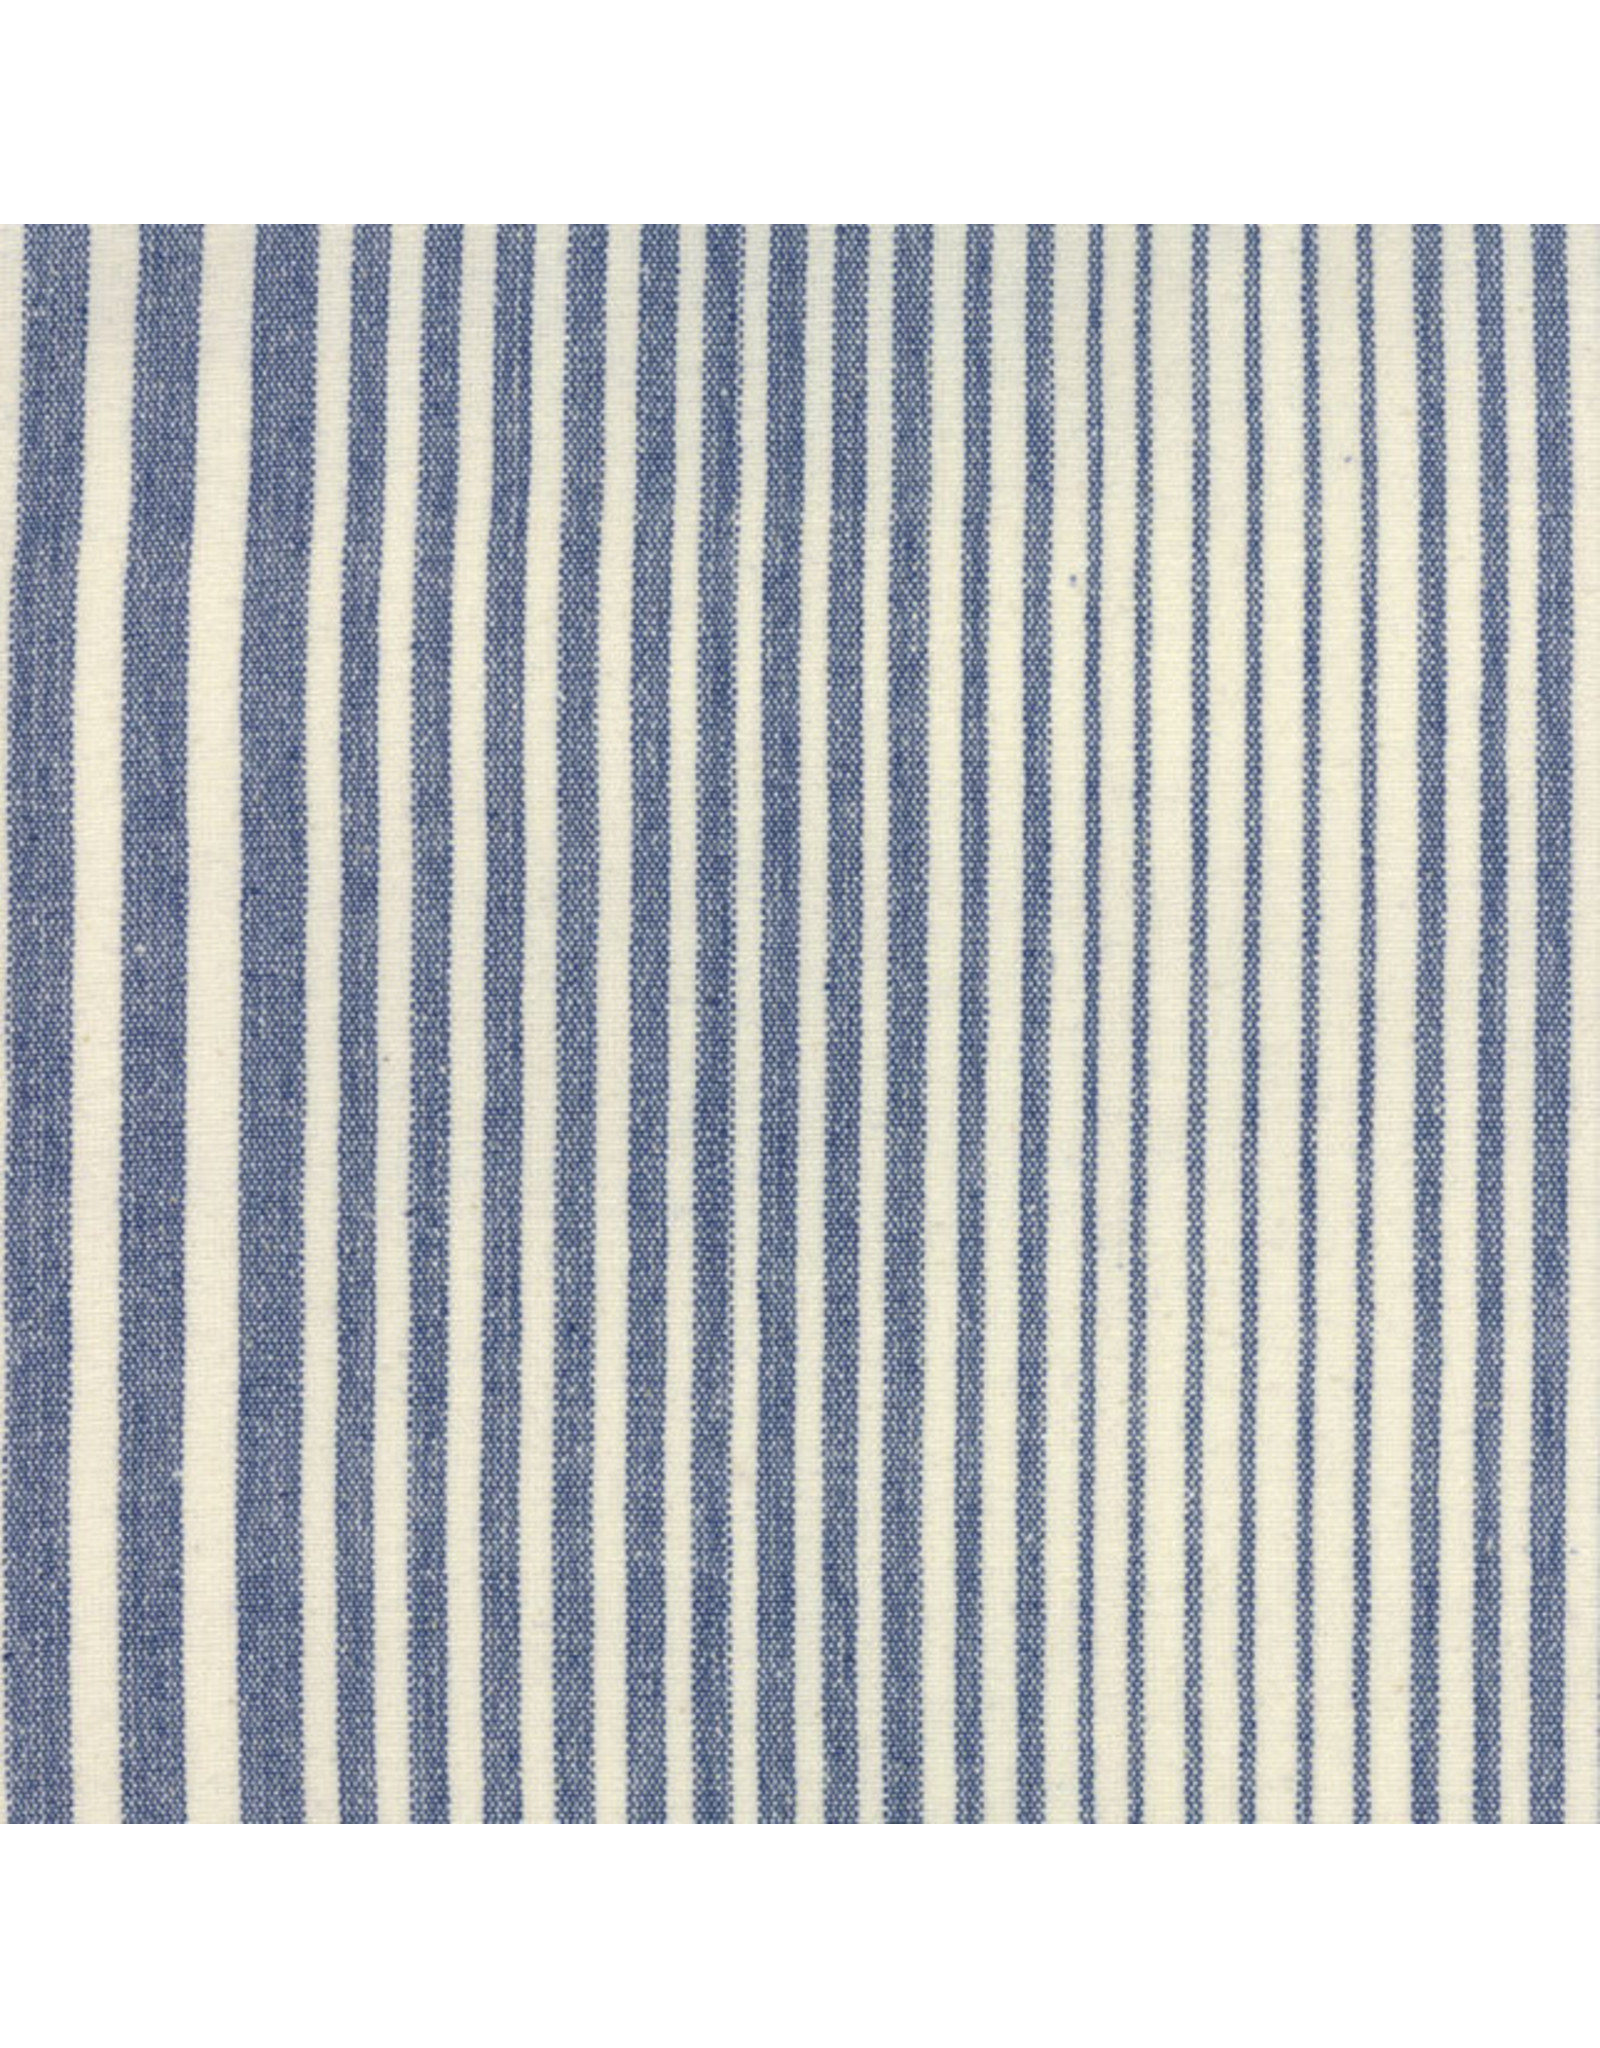 Moda Blue Plate Toweling 16" wide, Cream and Blue, Sold by the Yard